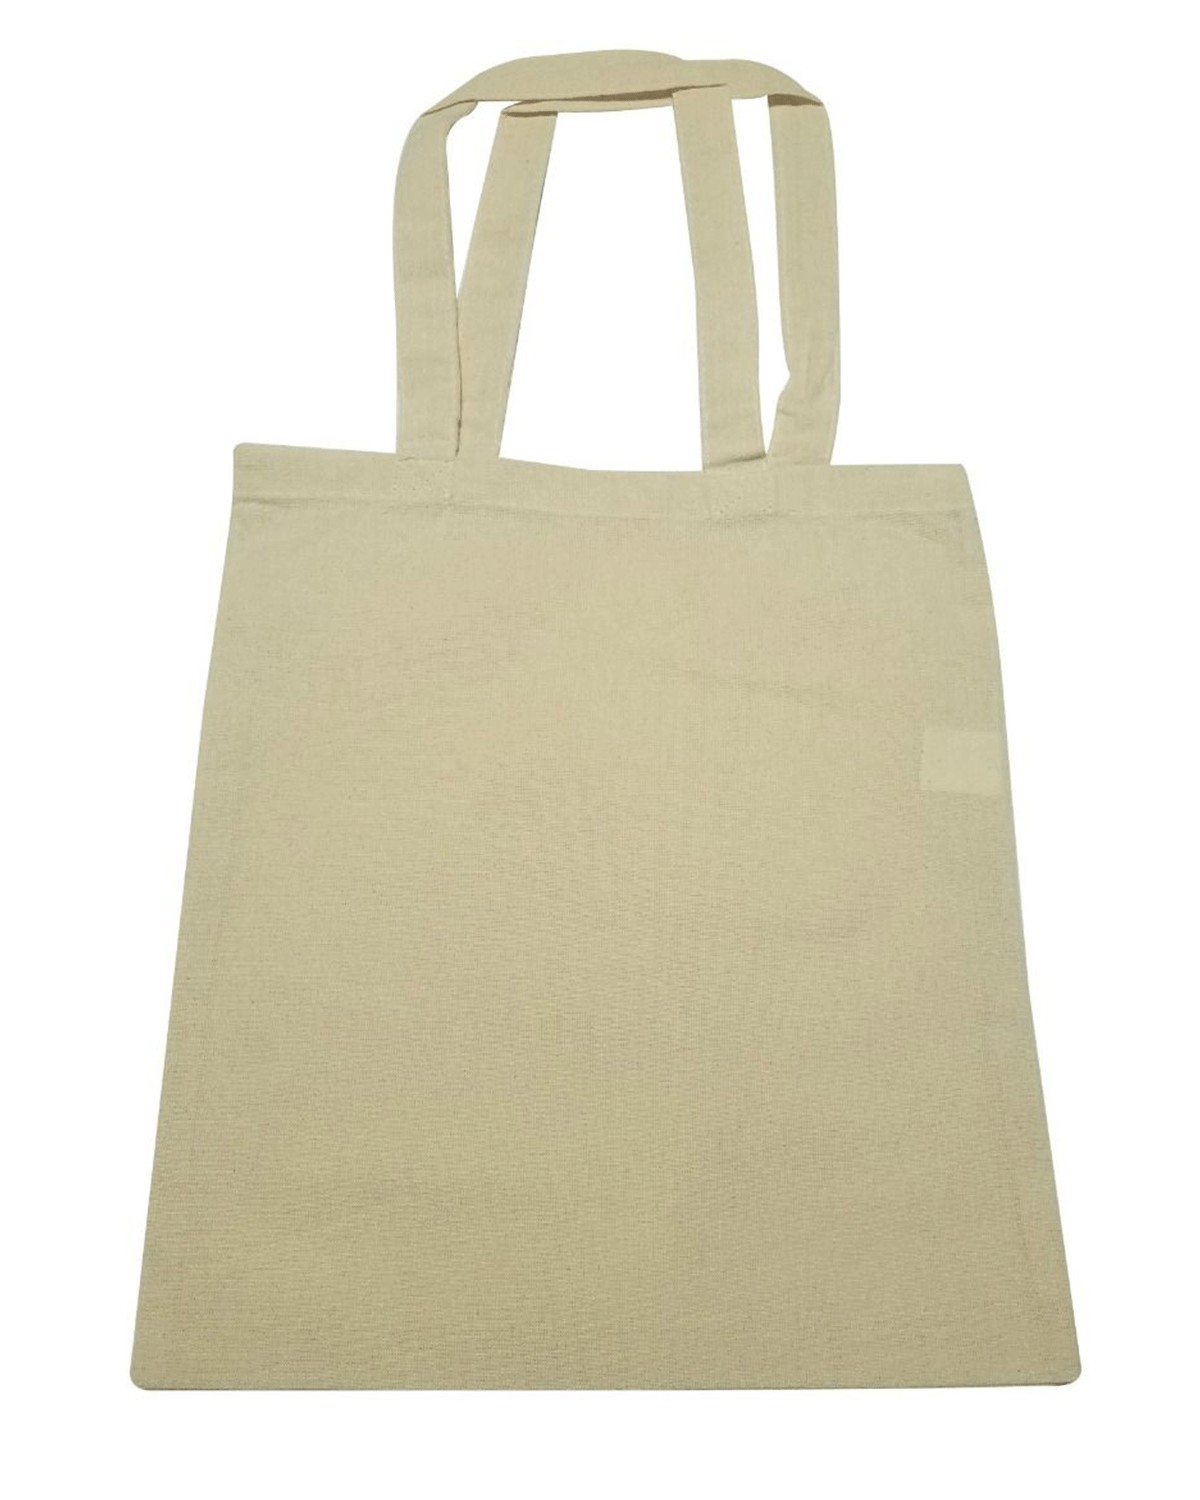 Liberty Bags OAD117 OAD Cotton Canvas Tote - Free Shipping Available